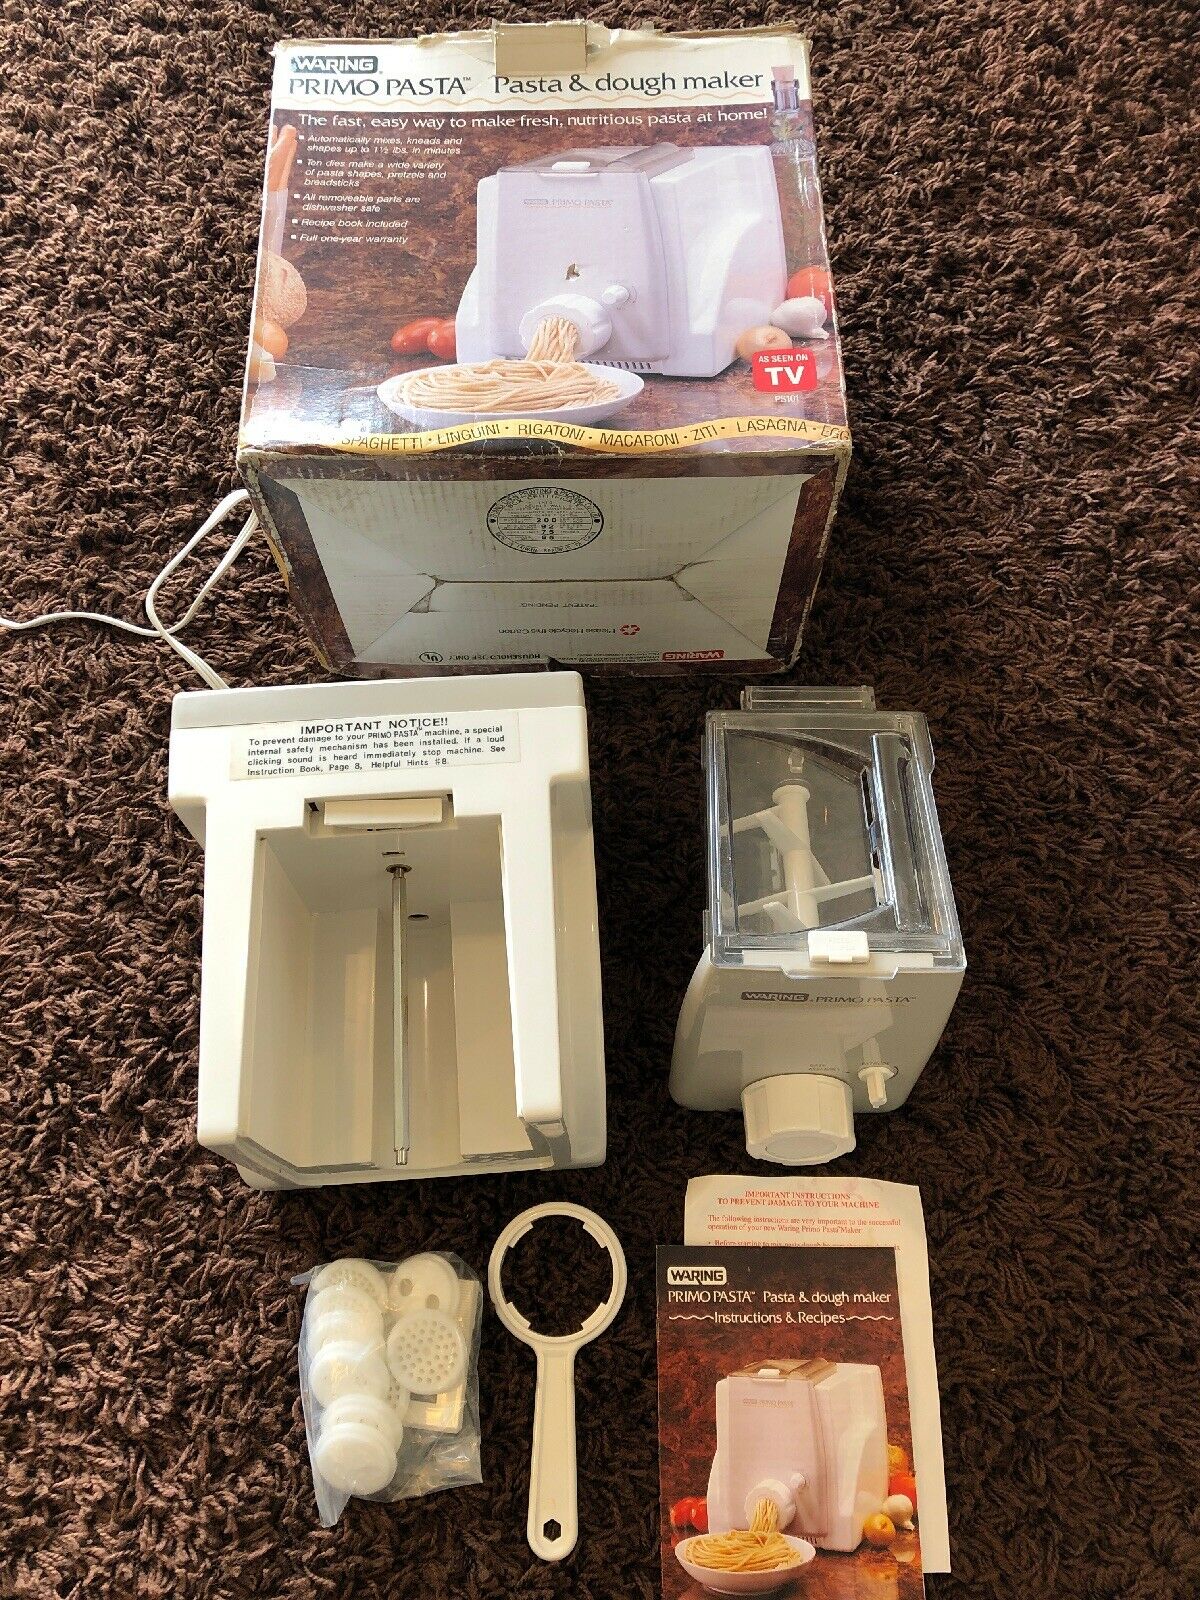 Waring Primo Pasta Pasta & Dough Maker - Used Good Clean Condition